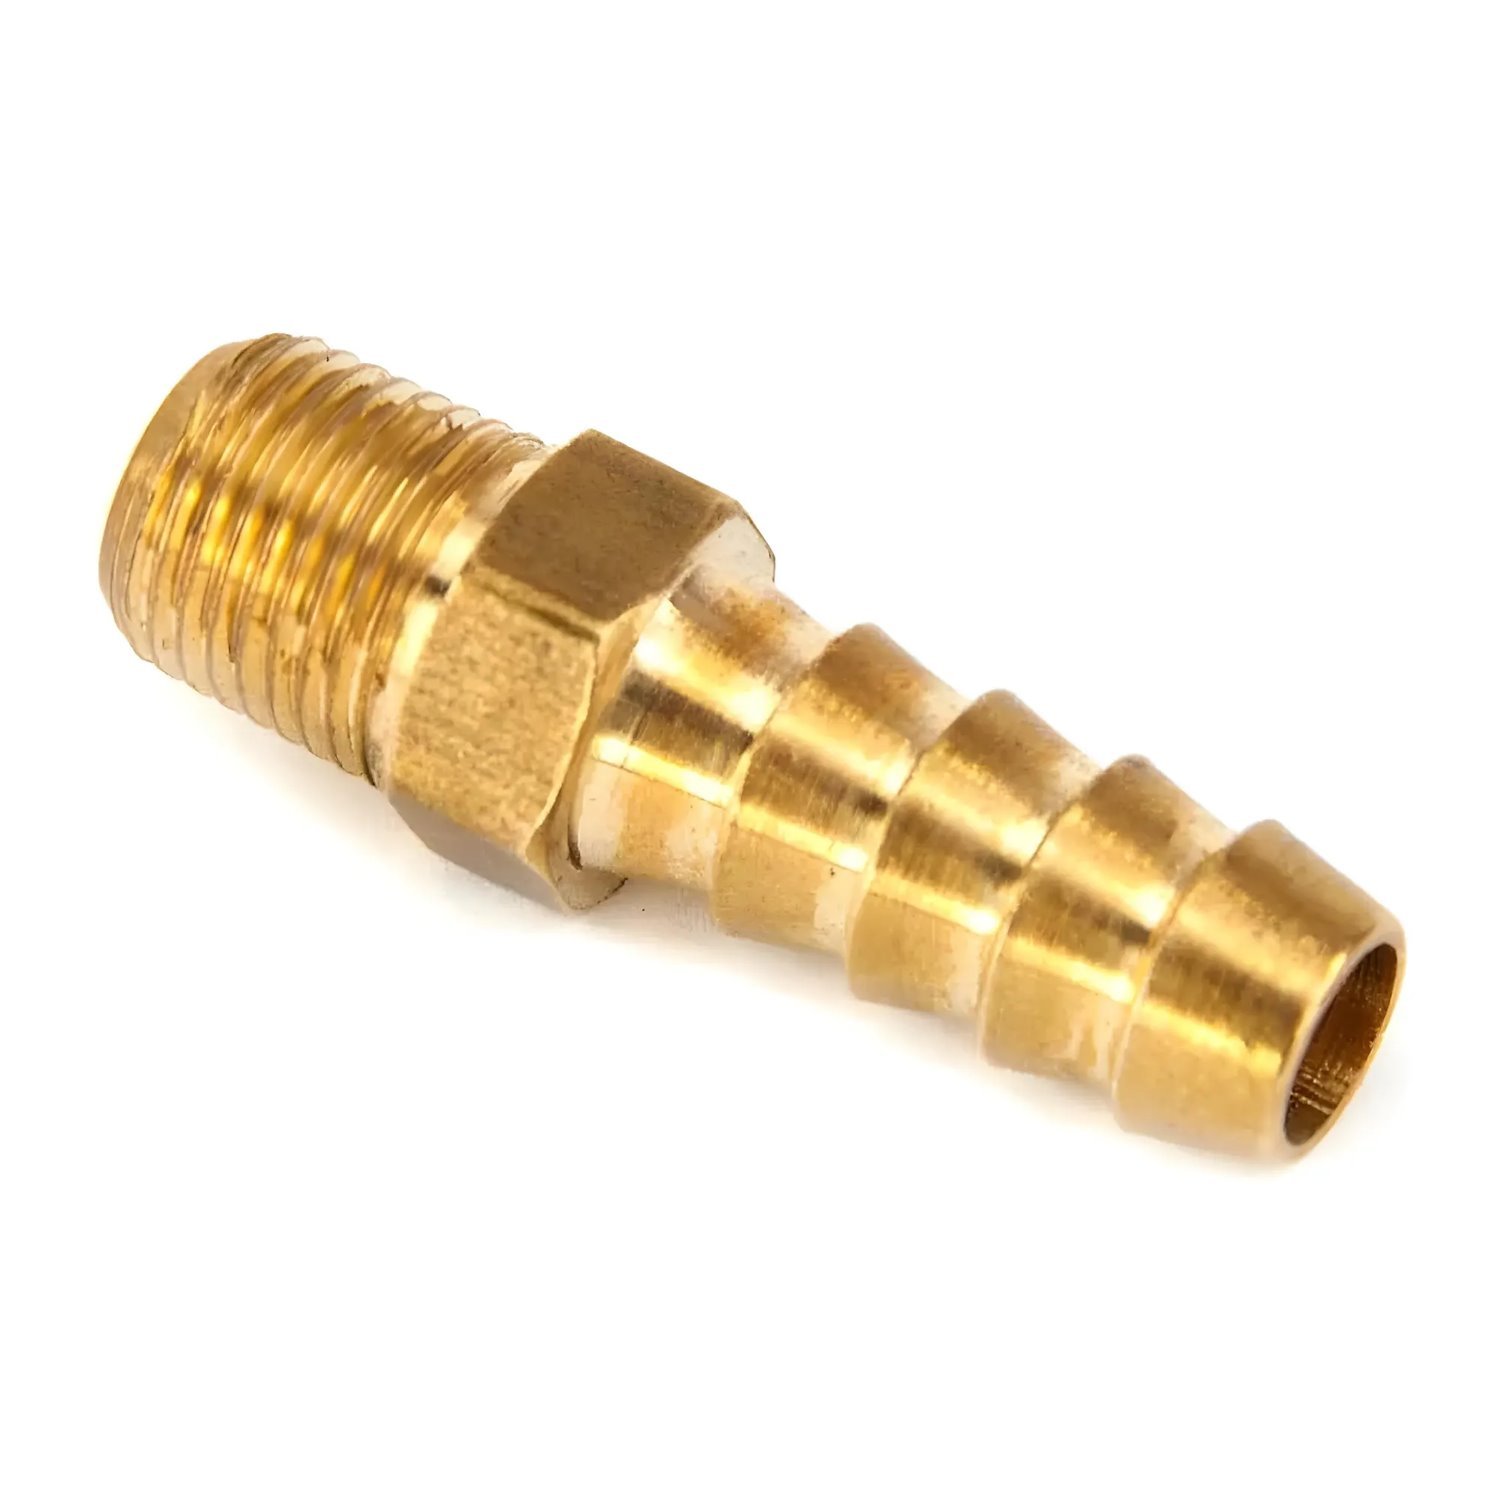 00-01235-B 1/8 in. NPT x 1/4 in. Hose Barb Straight Fitting, Male/Male